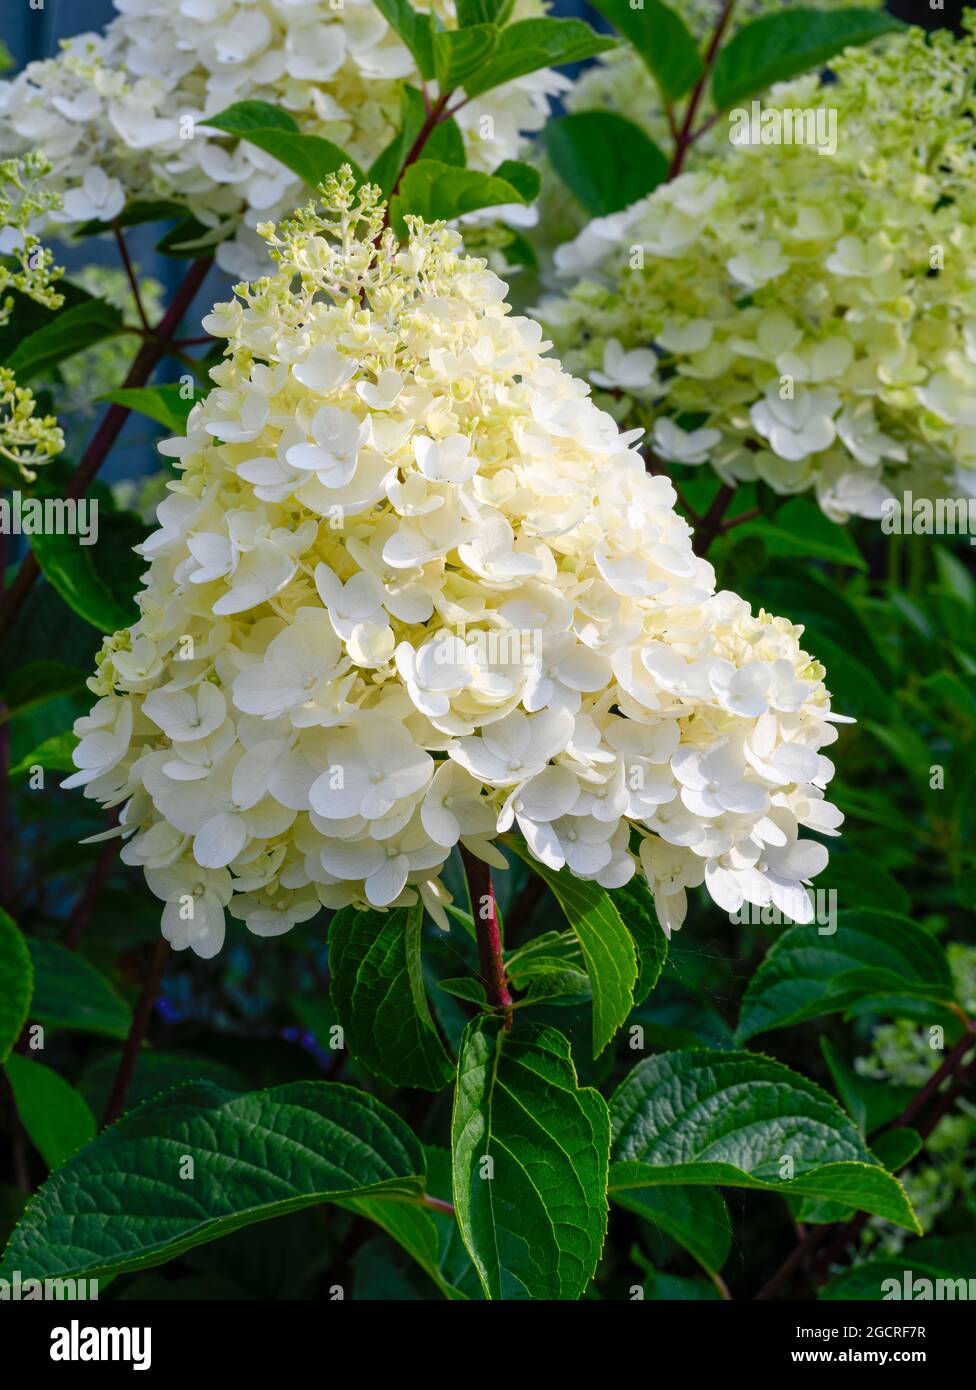 Beautiful white Limelight Hydrangea flower with a dramatic conical shape Stock Photo